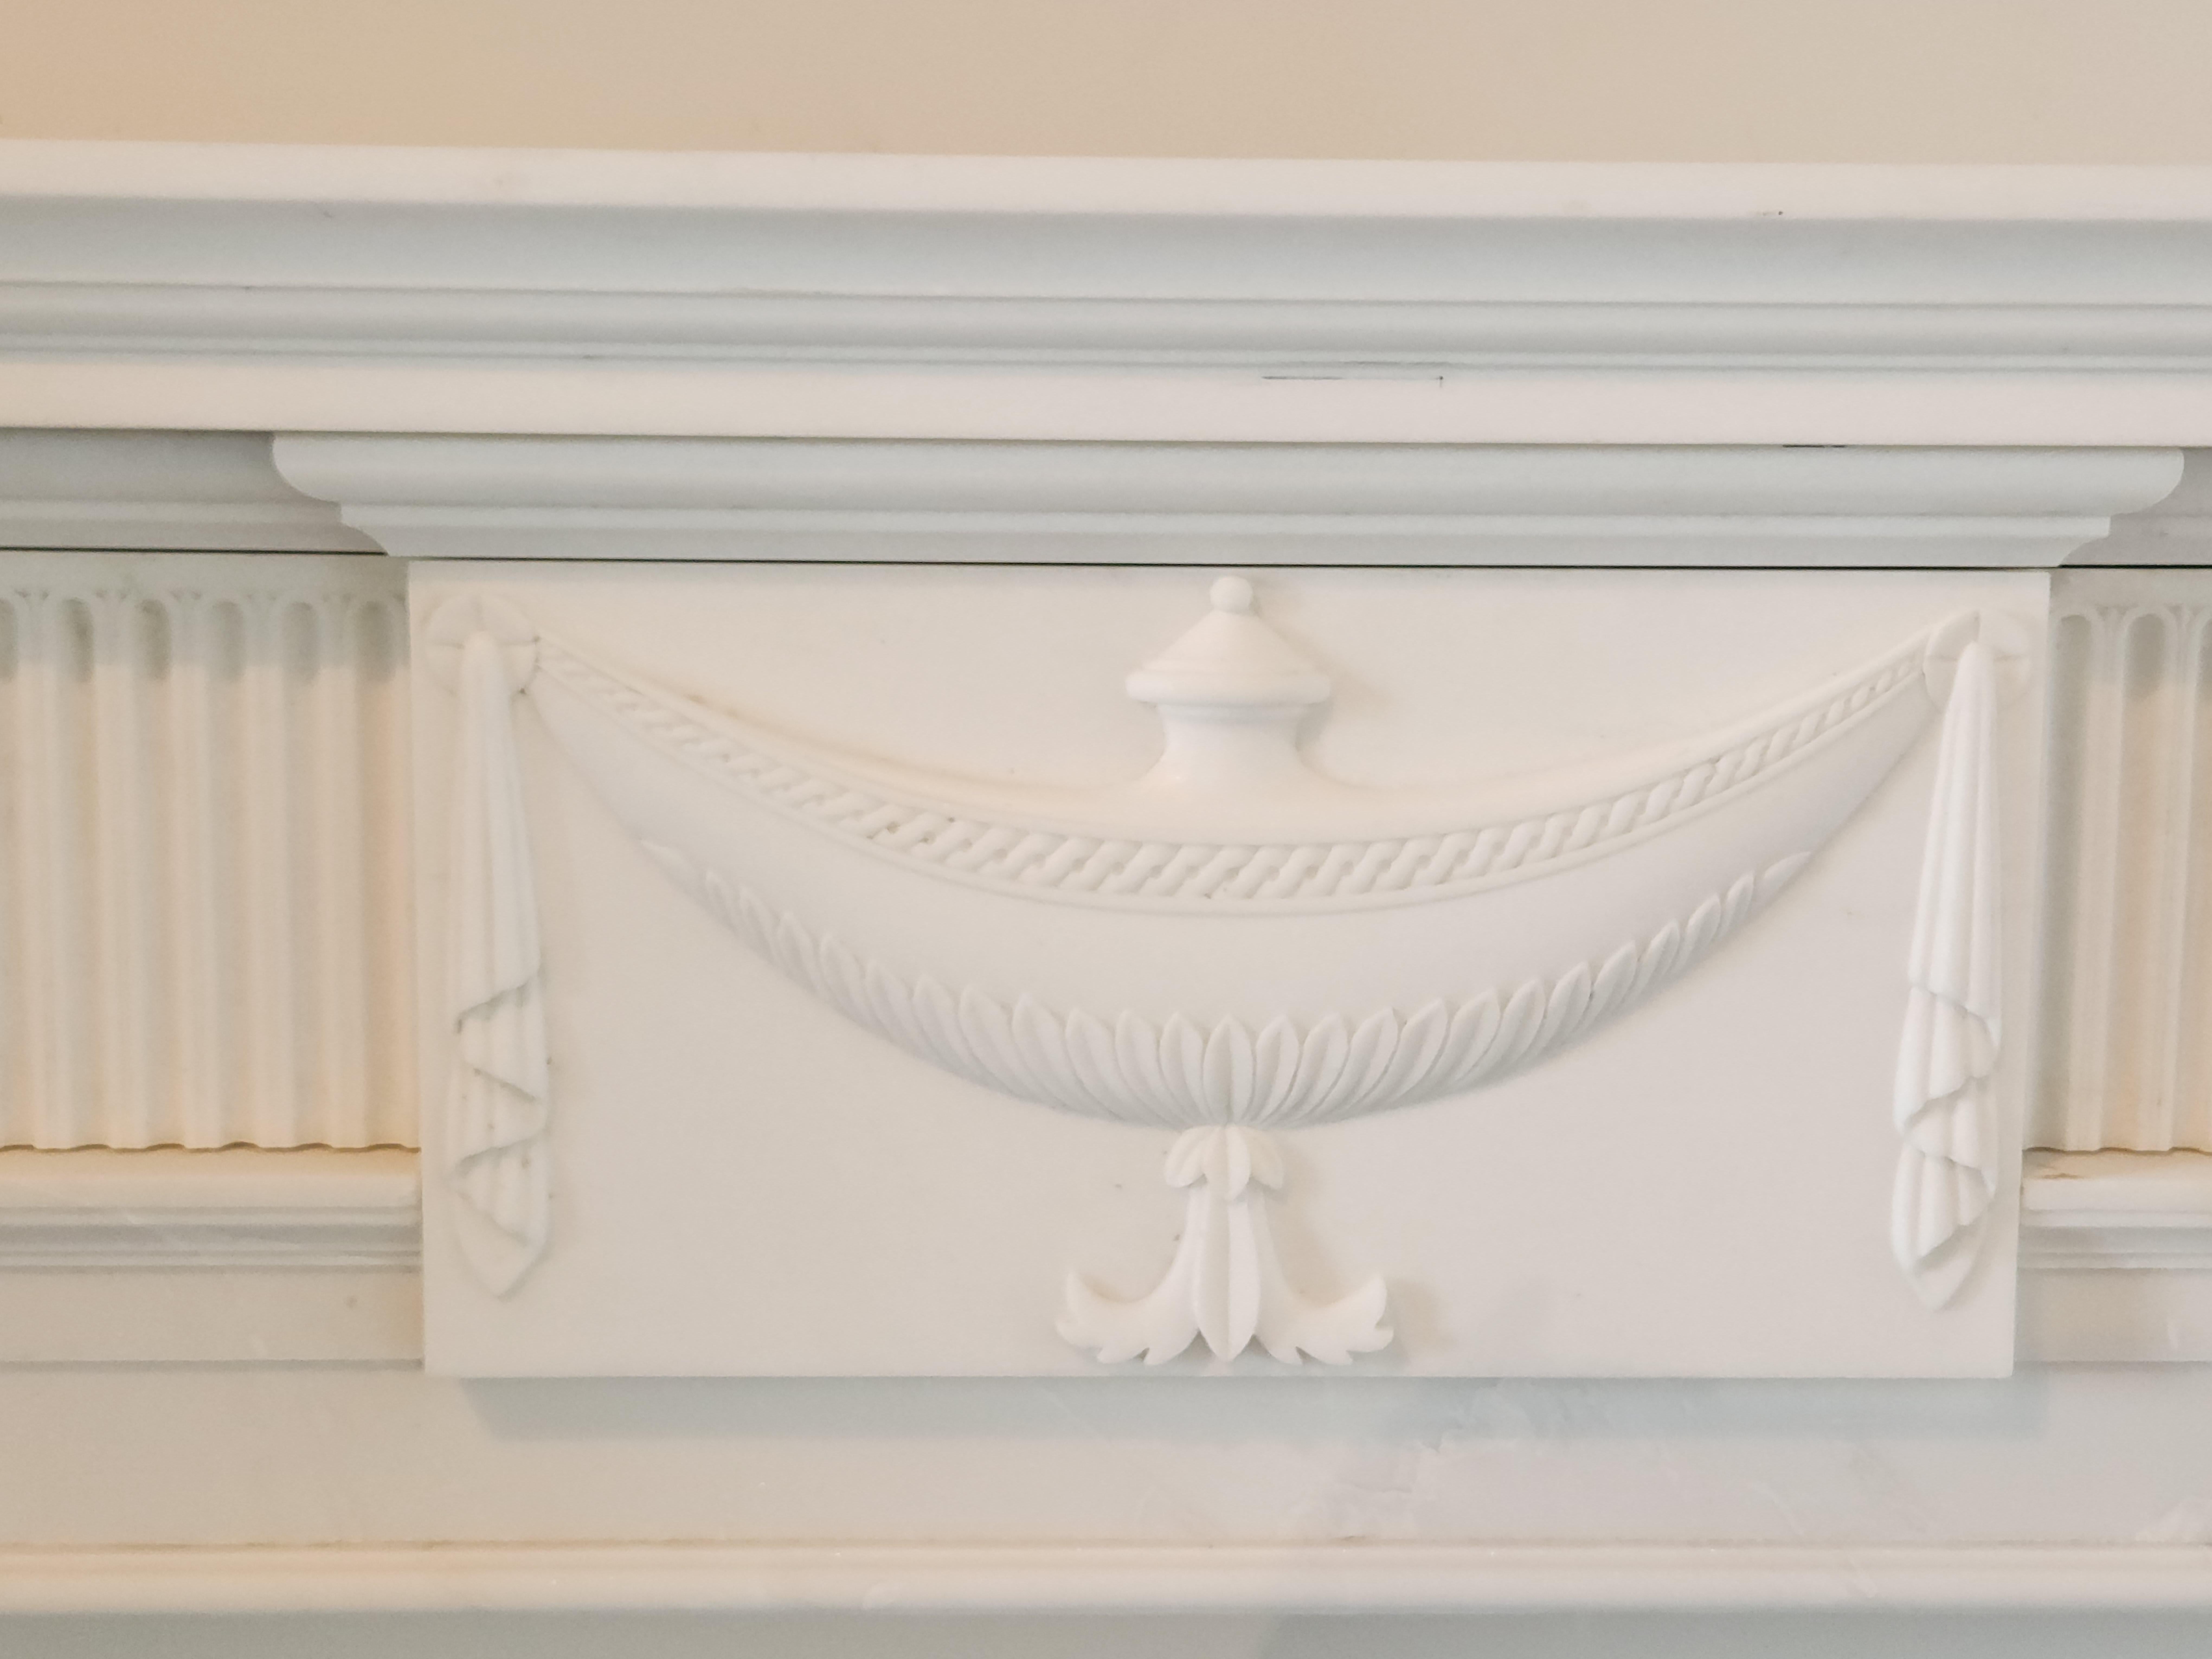 This beautiful Regency-style fireplace mantel is hand-carved in elegant white marble. The marble is a bright white, and is very clean, with very little veining. The hand-carved details on the fireplace include delicately-carved urns on either side